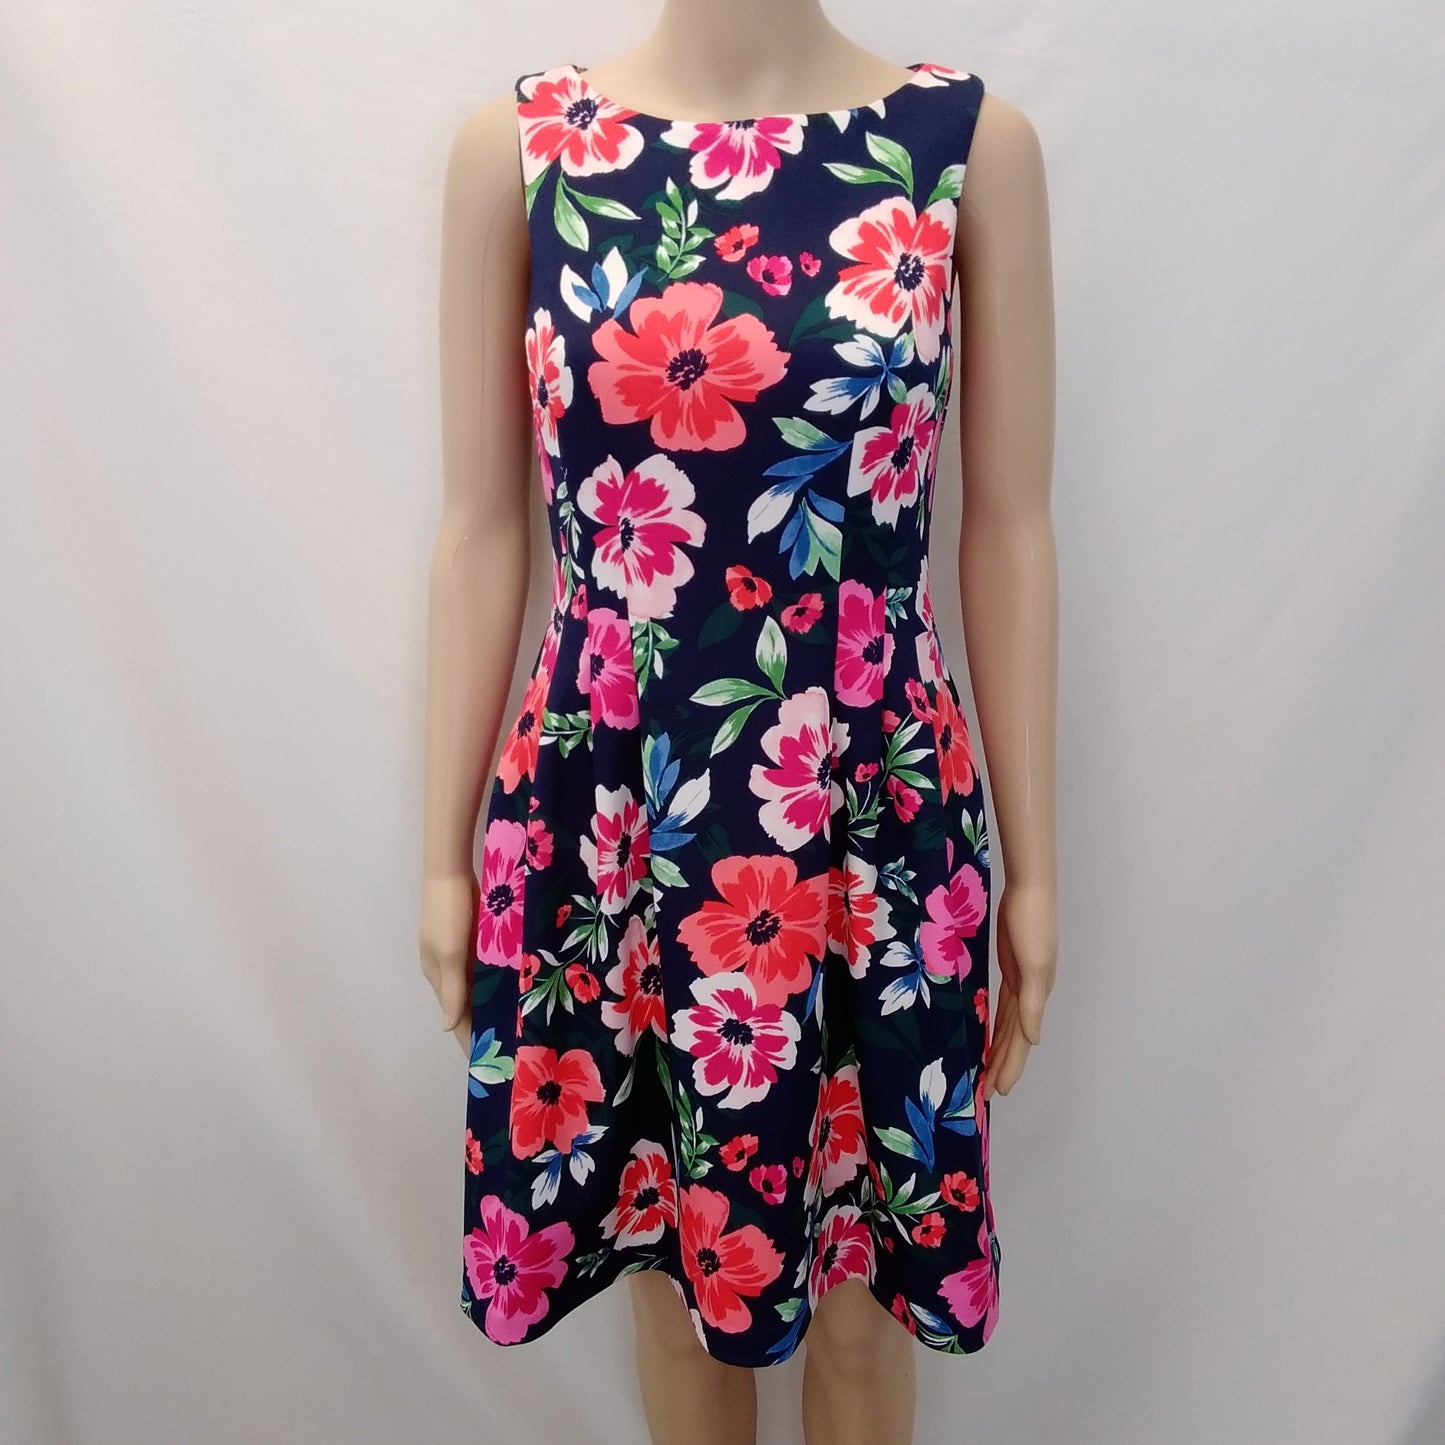 VINCE CAMUTO navy pink floral Sleeveless Dress - 4